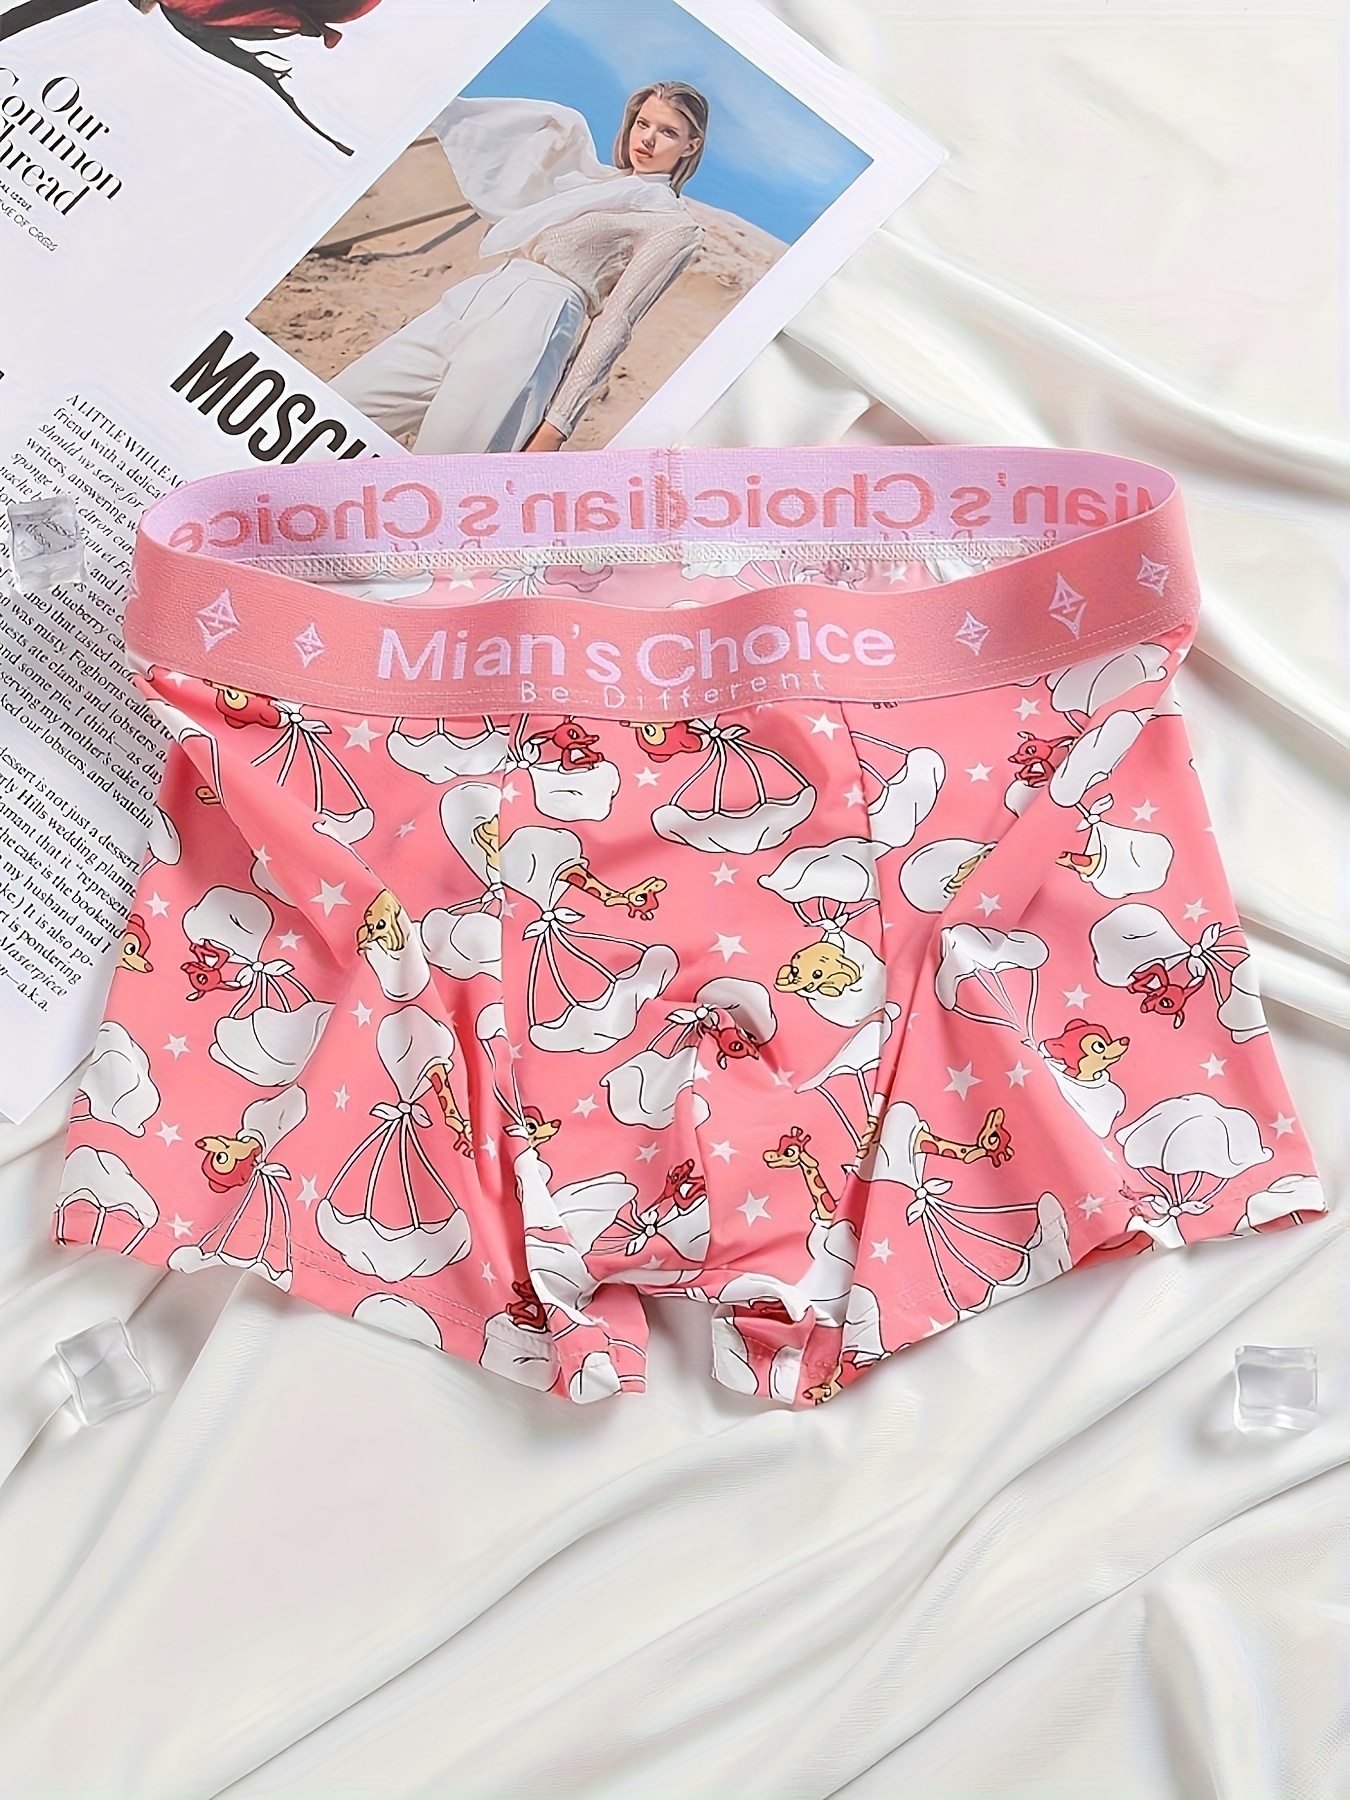 2-Pack Customize Cartoon Pattern Comfort Cotton Boxers for Boys